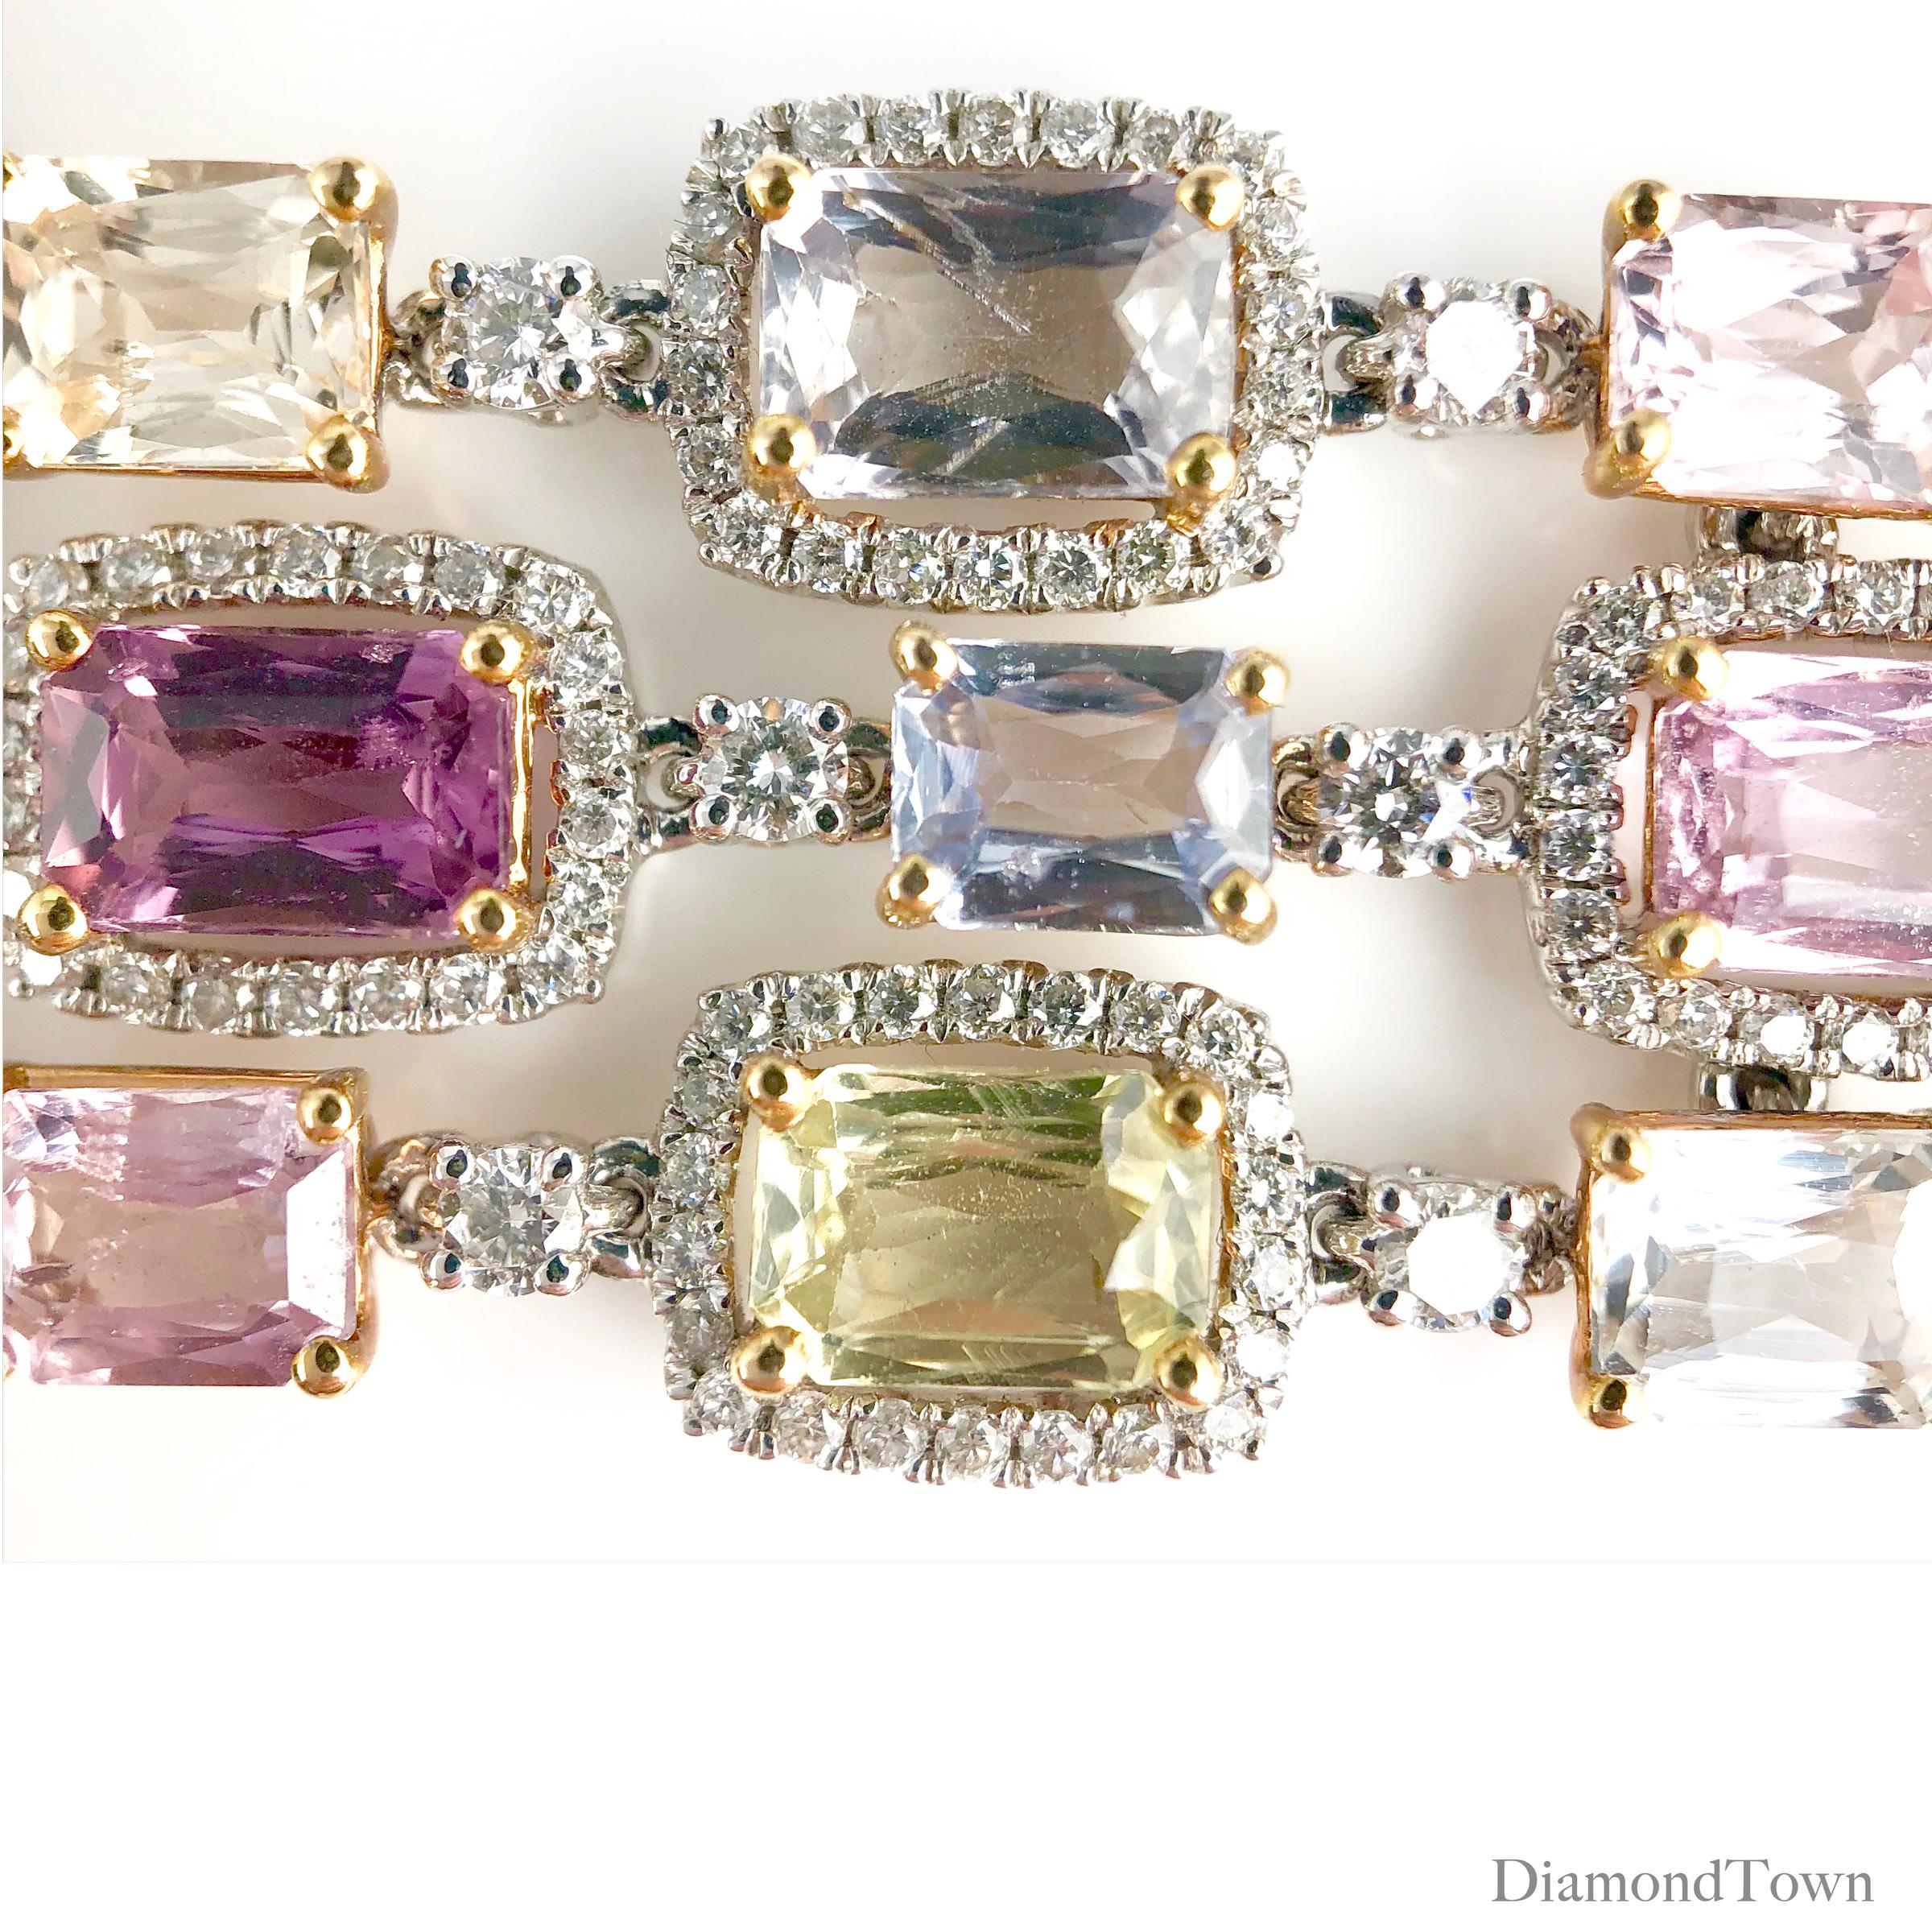 (DiamondTown) This bracelet features 31.54 carats multicolored sapphires, including pink, yellow, and lavender of varied levels of color, alternating with 4.22 carats diamonds. The overall design is set into three tracks, each including the sapphire